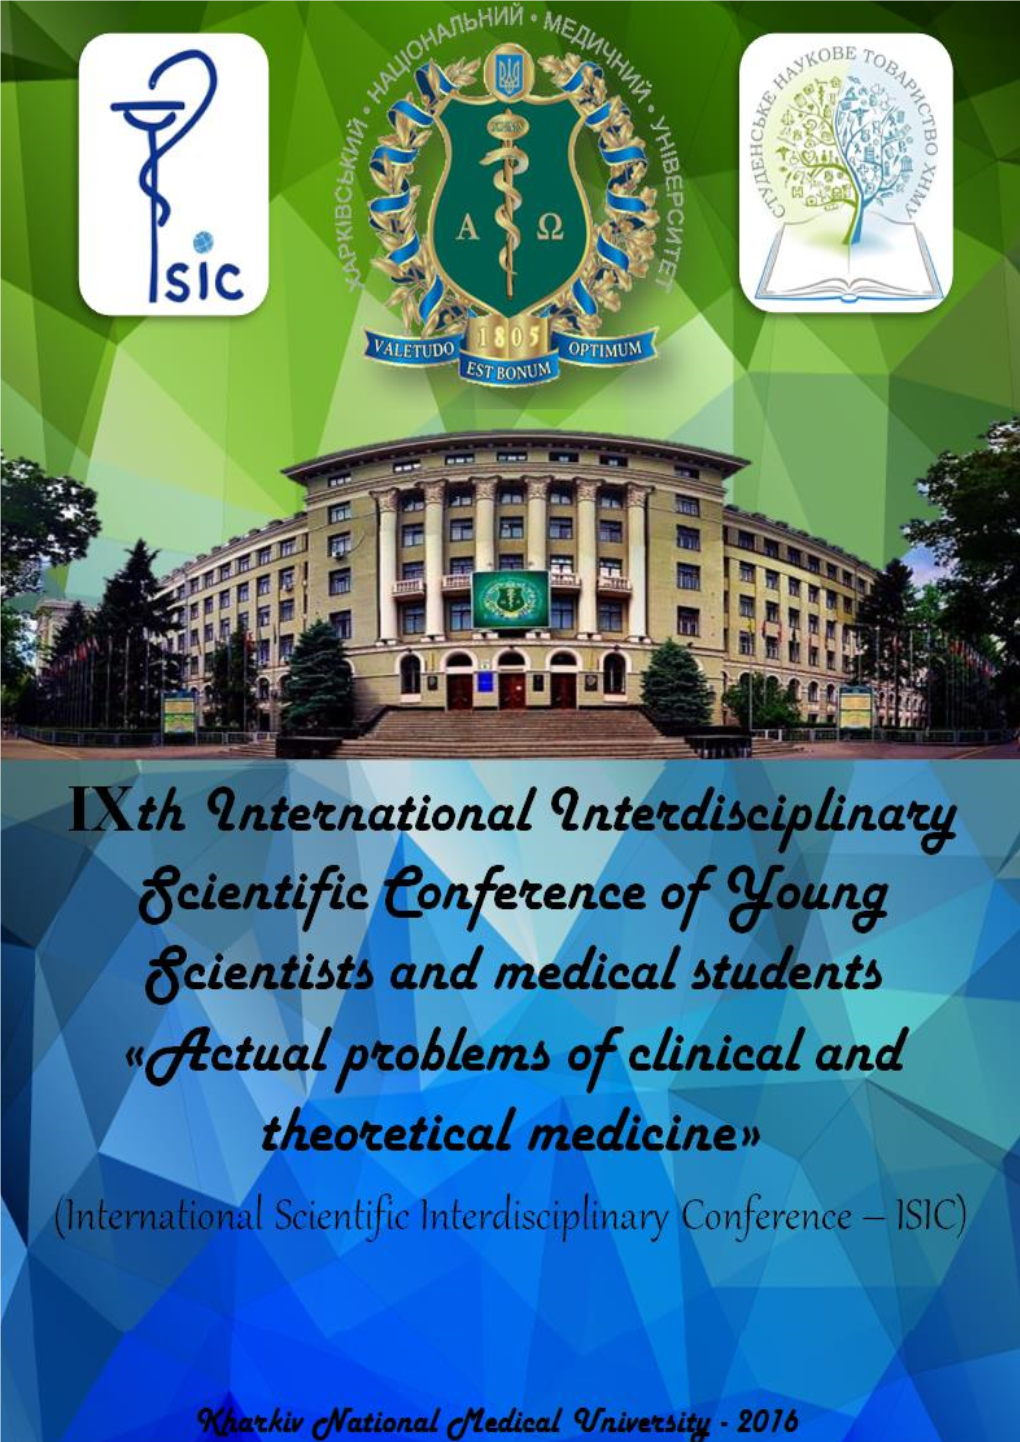 ISIC-2016 Abstract Book